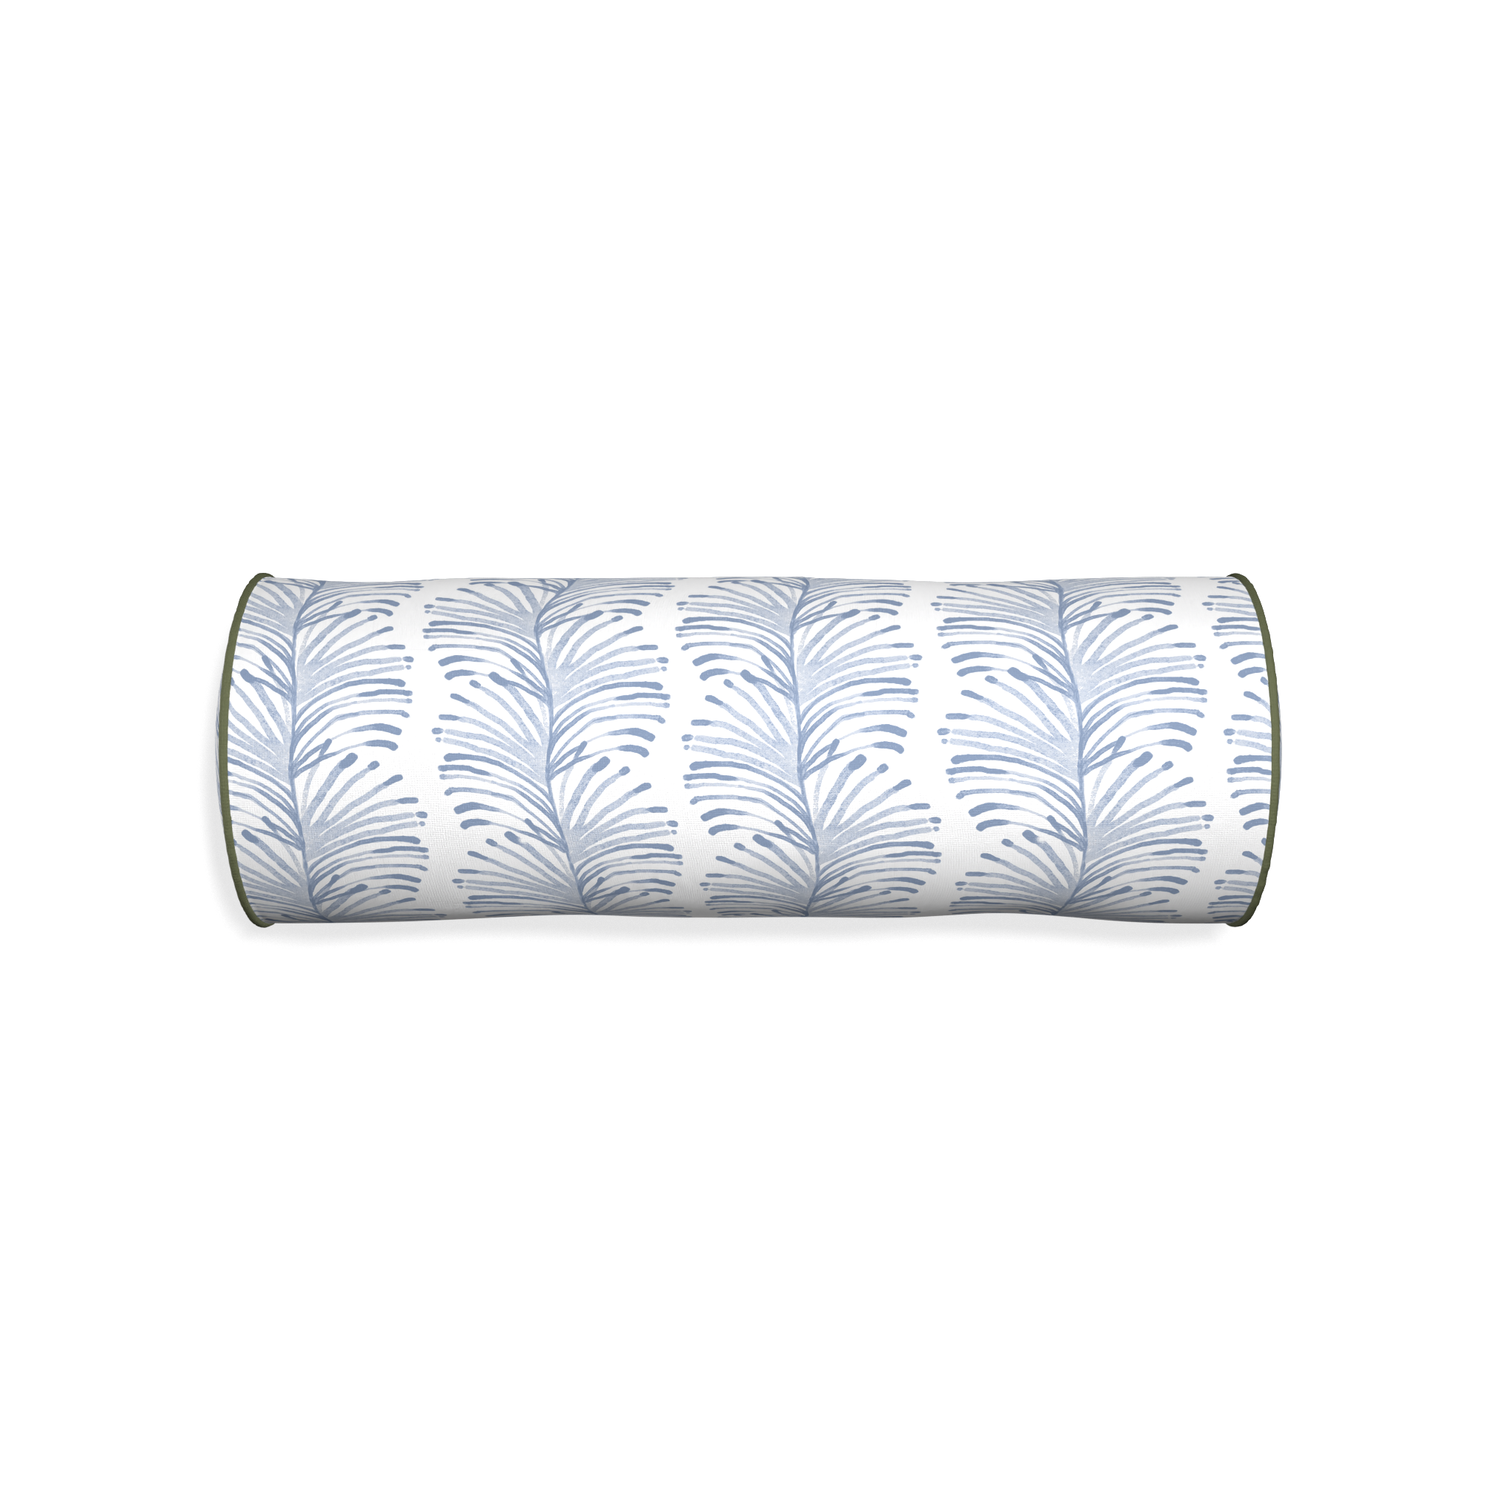 Bolster emma sky custom sky blue botanical stripepillow with f piping on white background